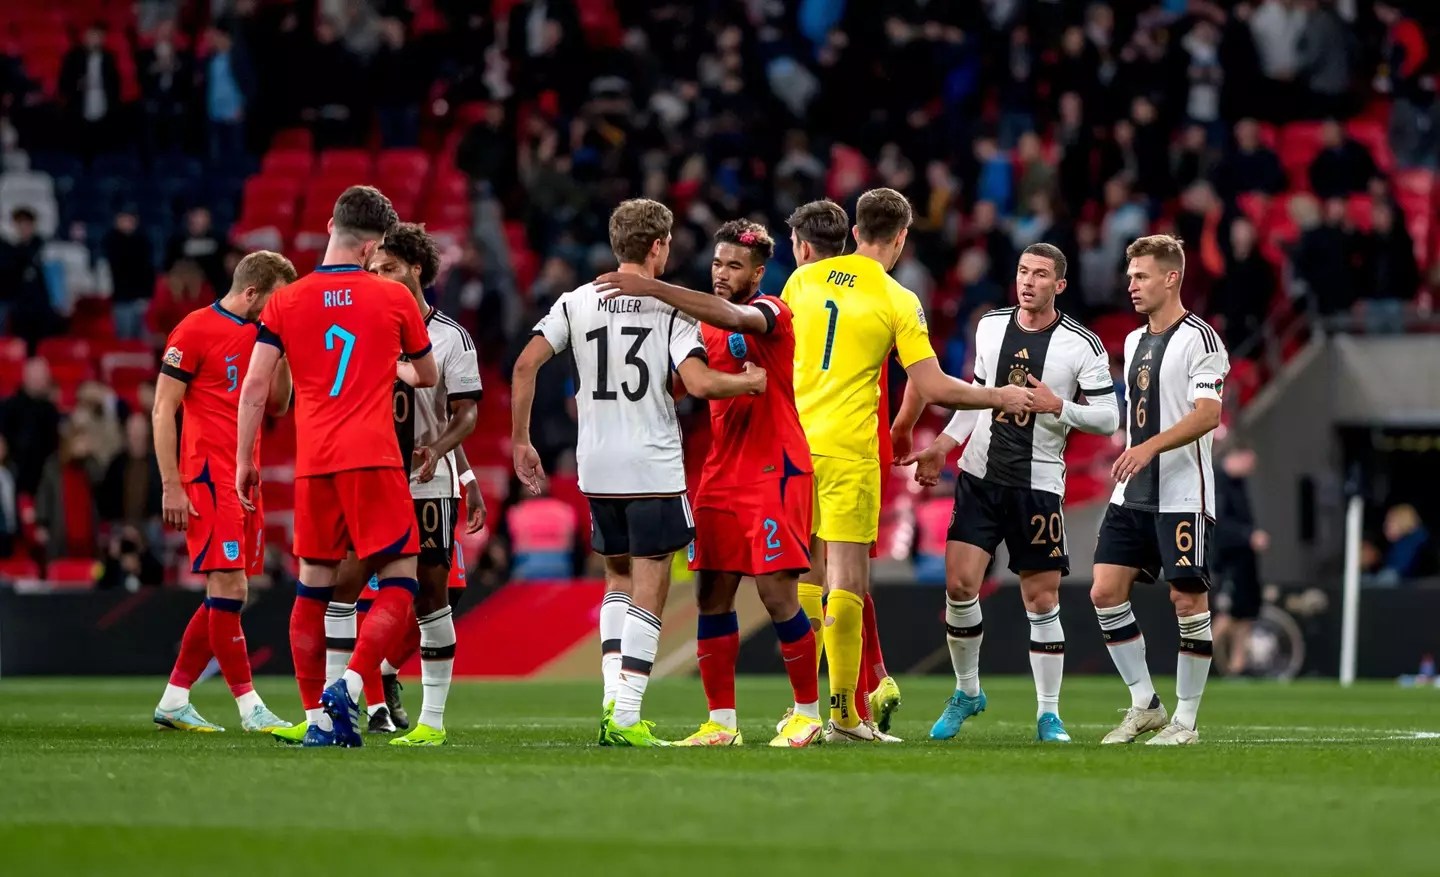 Monday's match between England and Germany ended in a 3-3 draw (Image: Alamy)